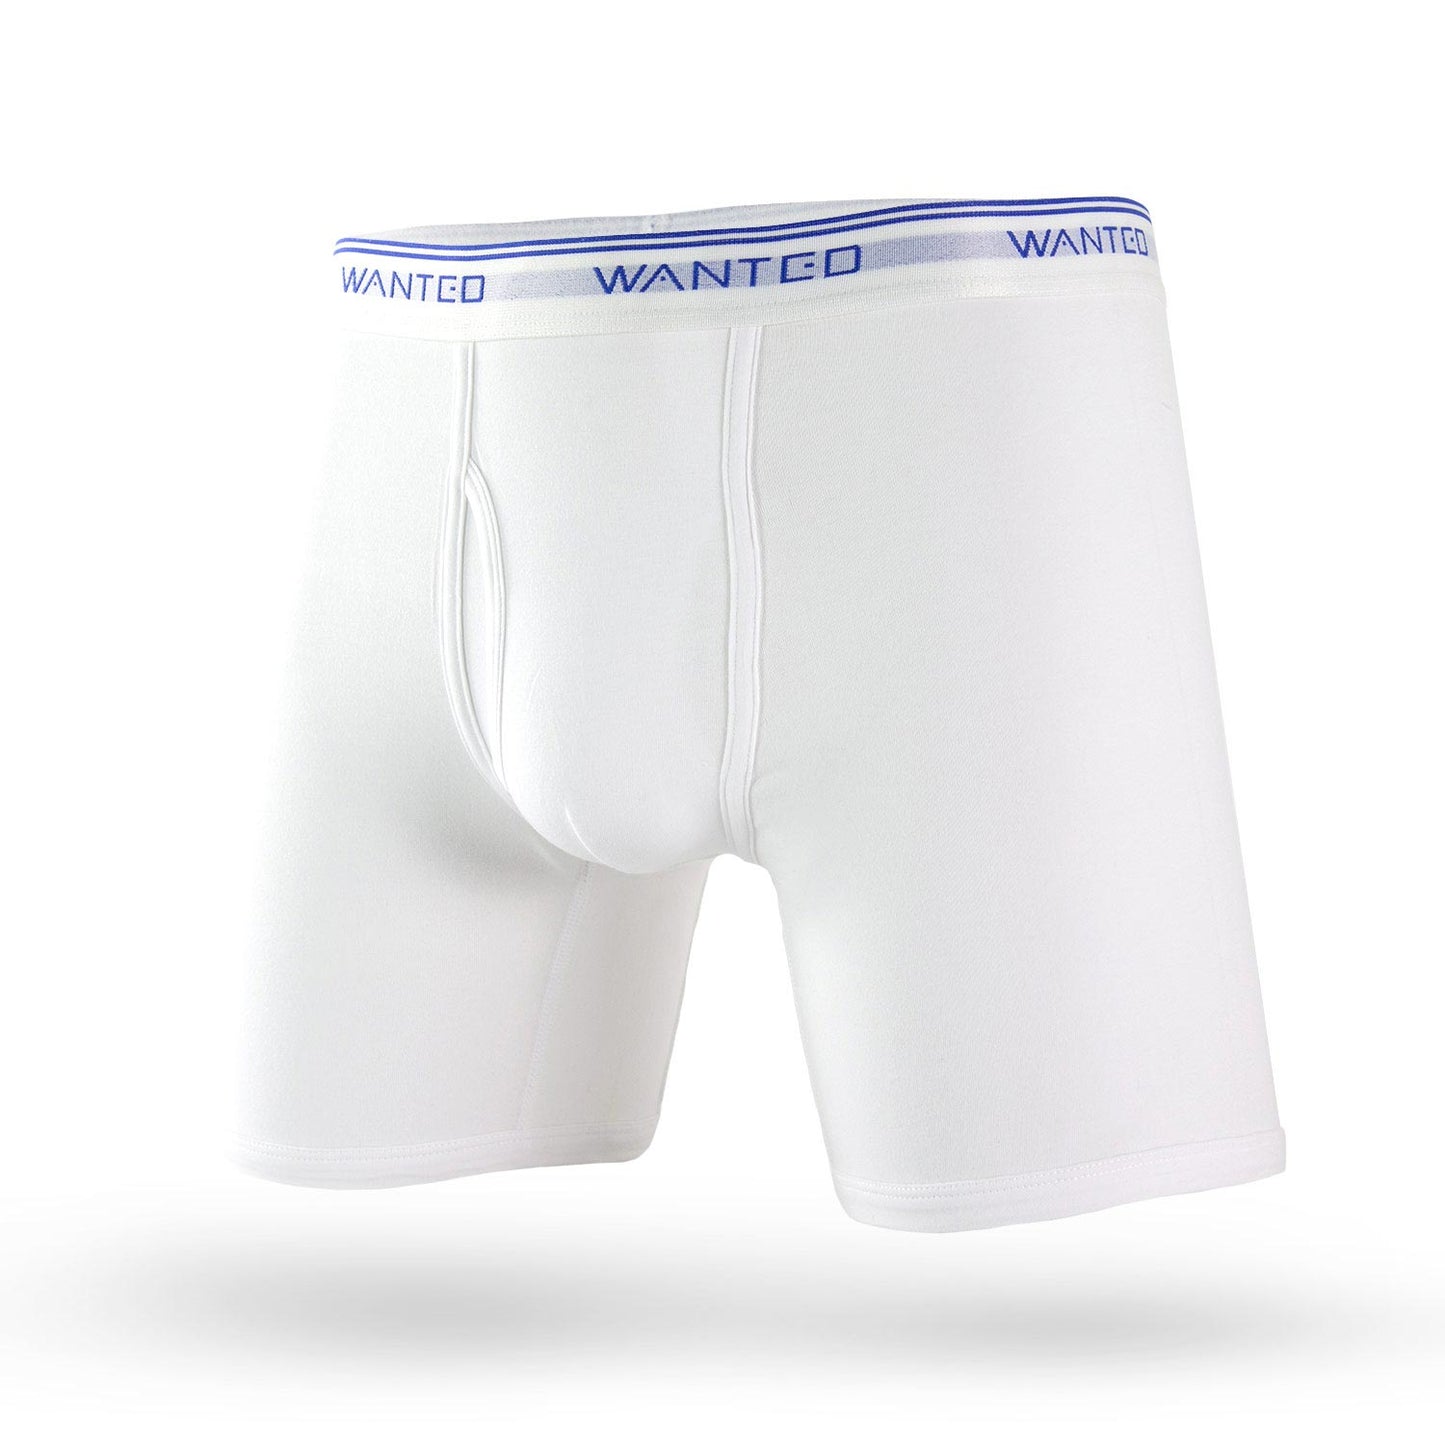 Boxer Little Wanted White - Tailles [24-36]